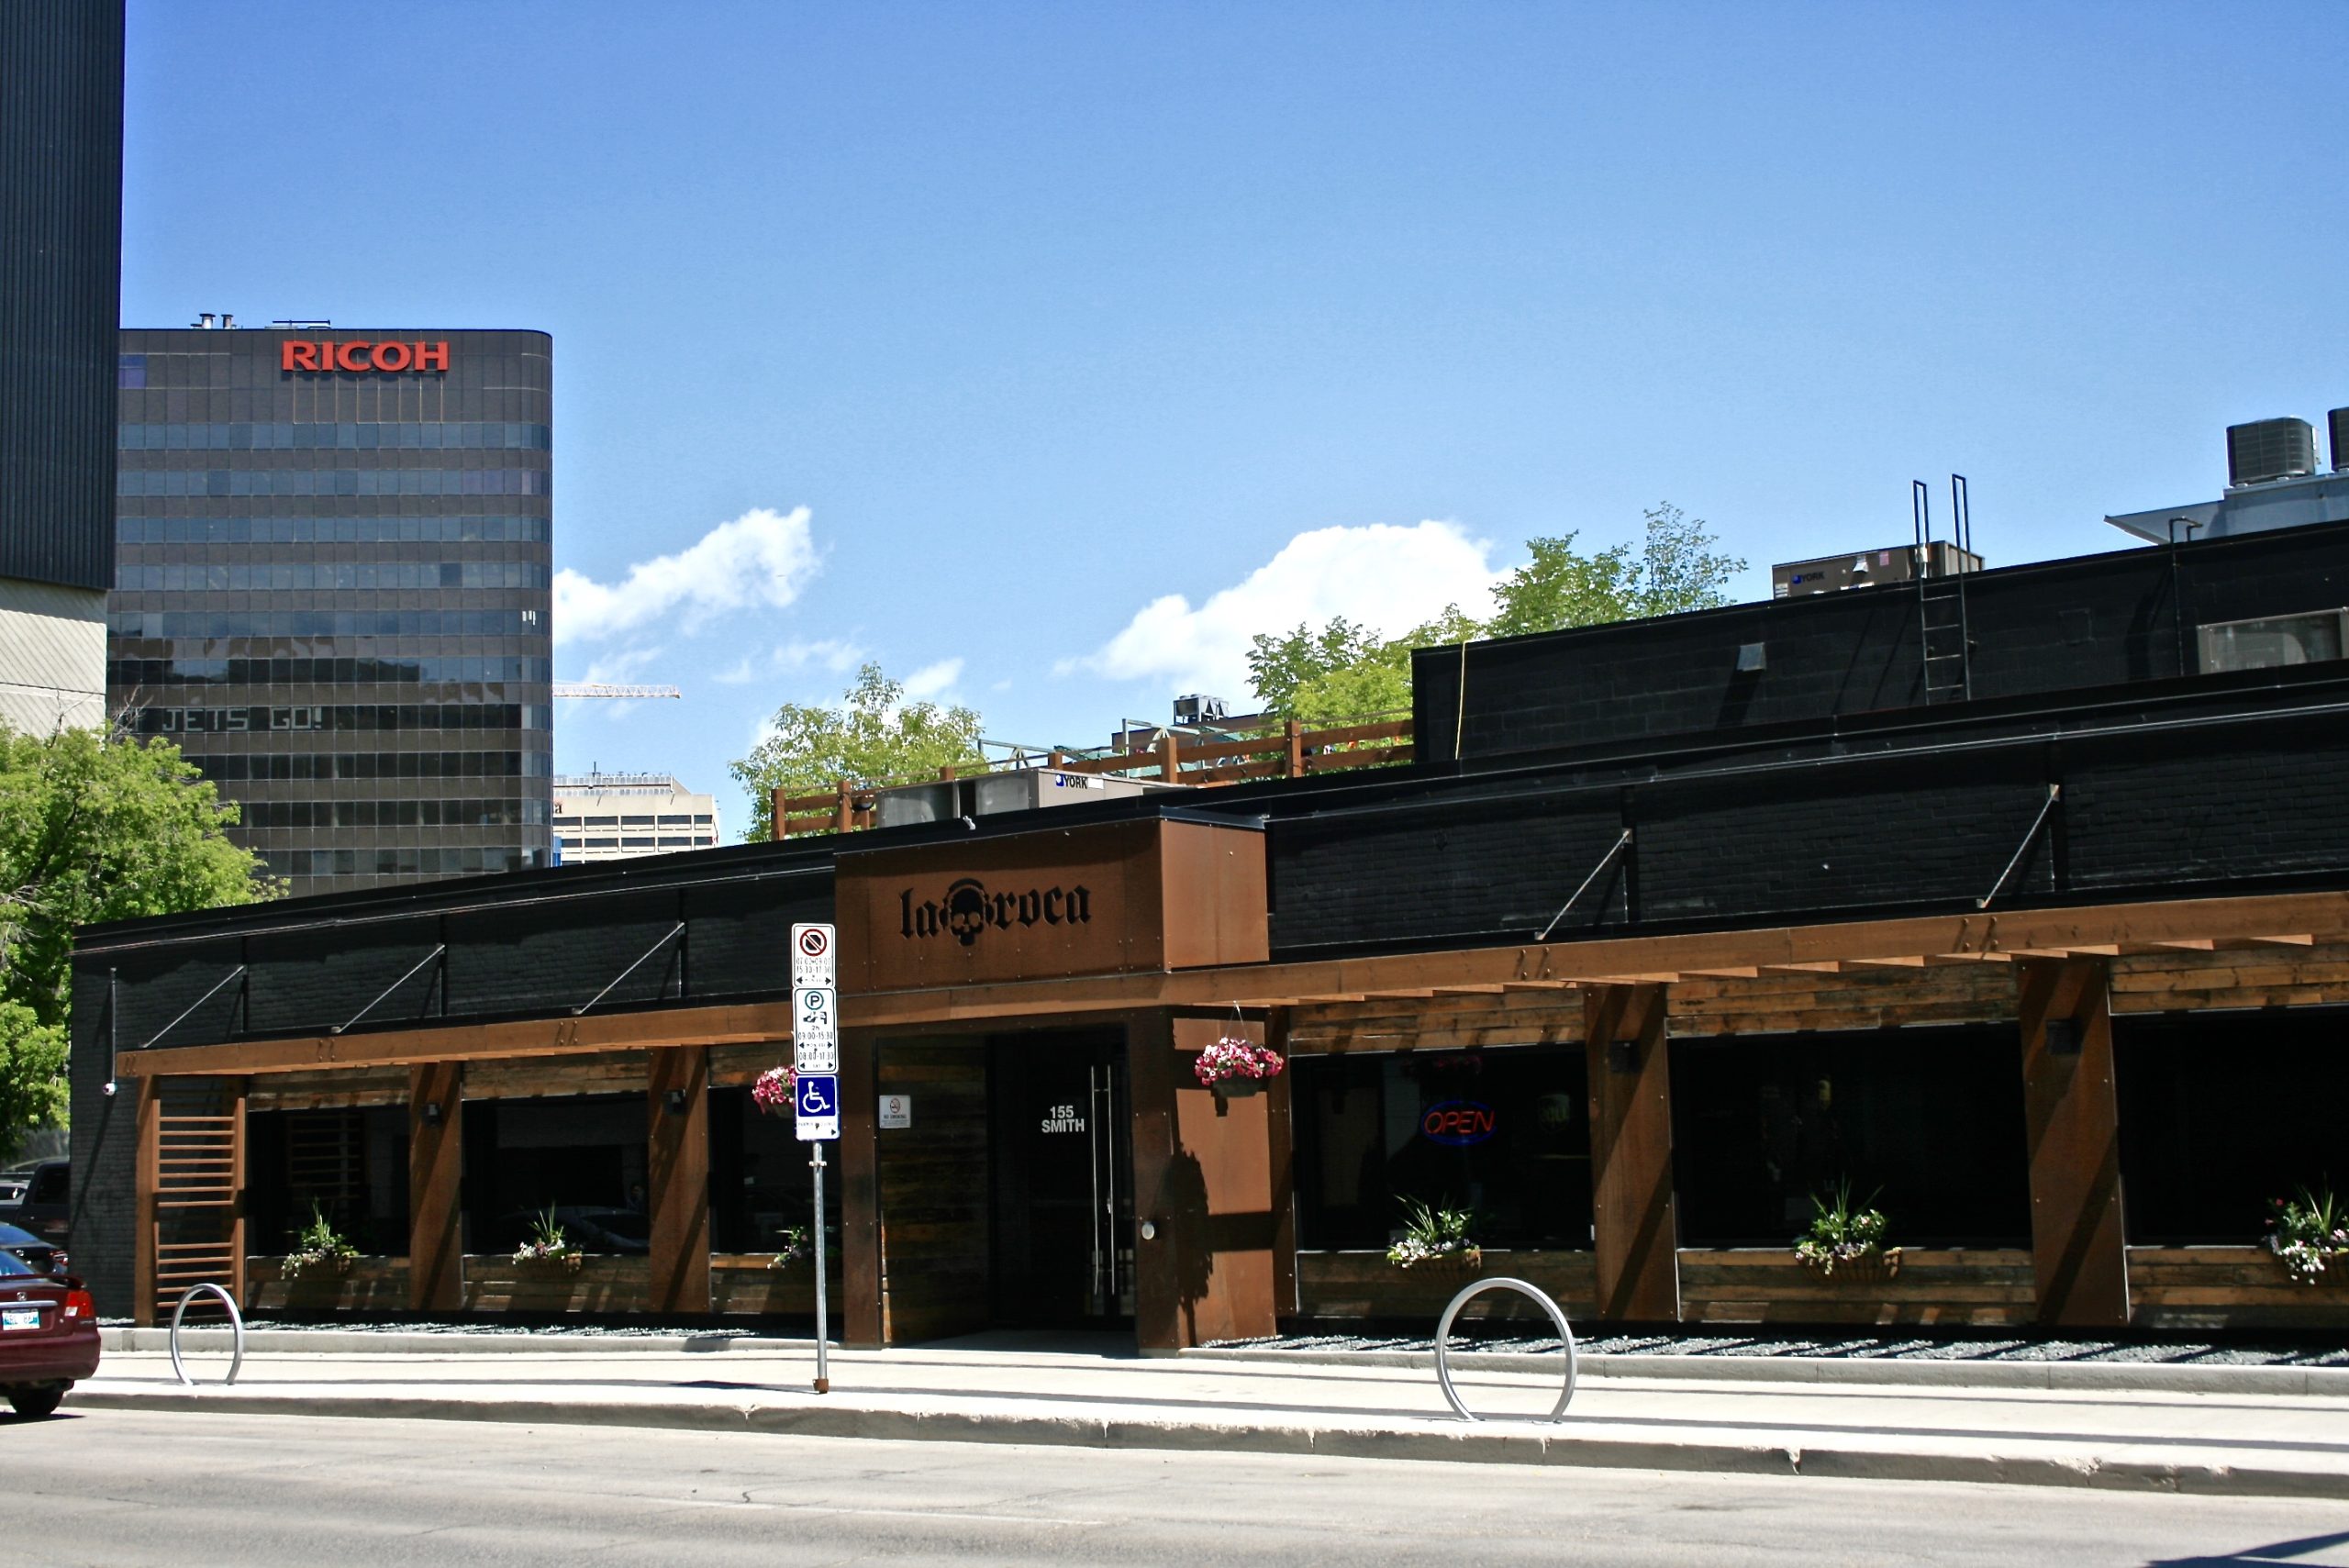 The exterior of the renovated 155 Smith Street. The building is black with wood accents. There is a sign for La Roca with a skull.